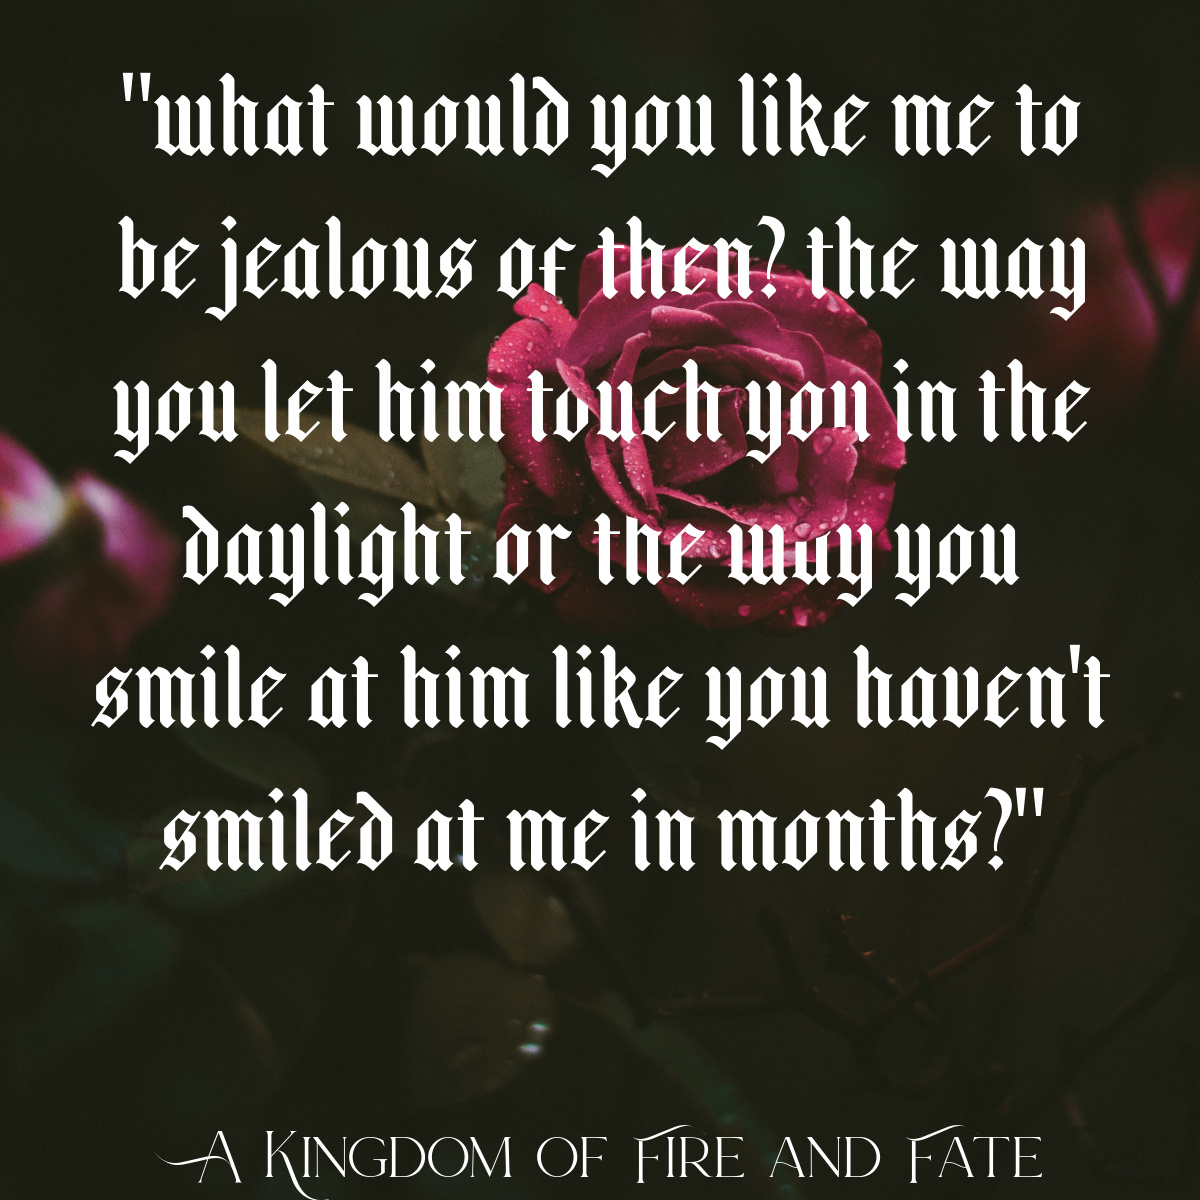 A Kingdom of Fire and Fate by Holly Renee - ShhMomsReading®ShhMomsReading®